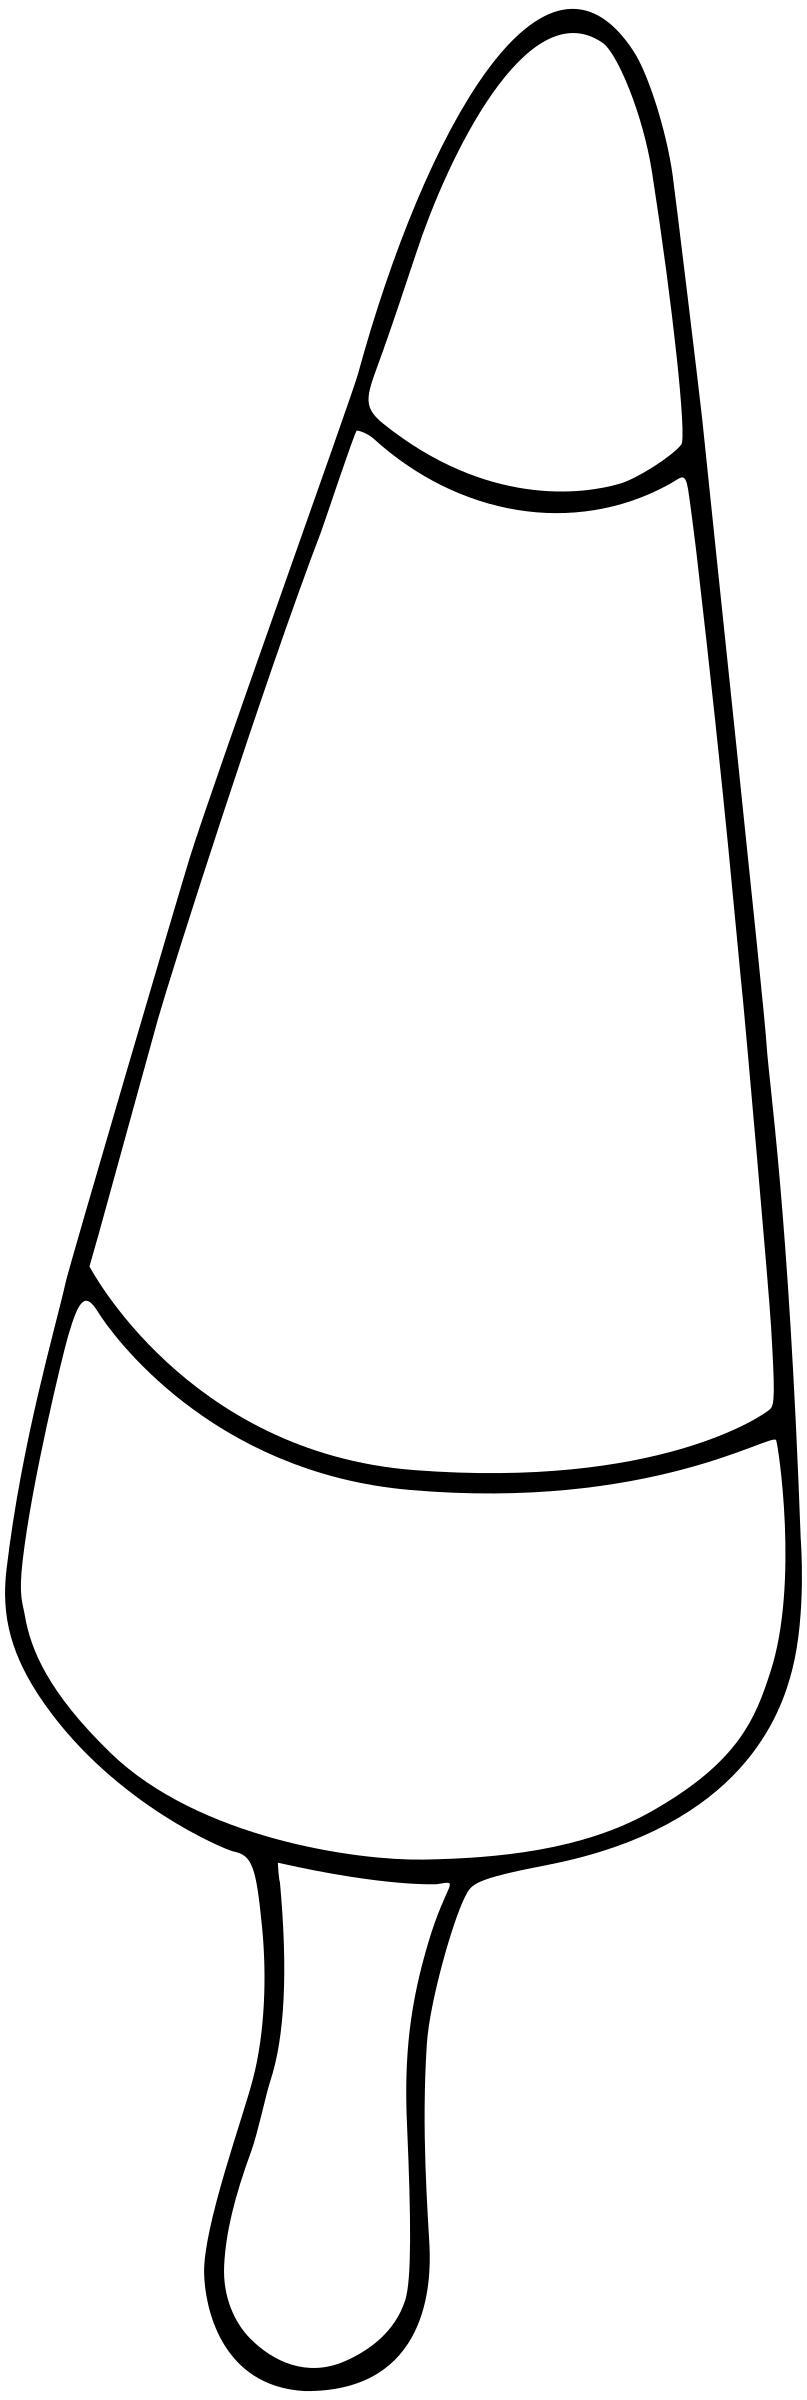 glace-6-bw png transparent